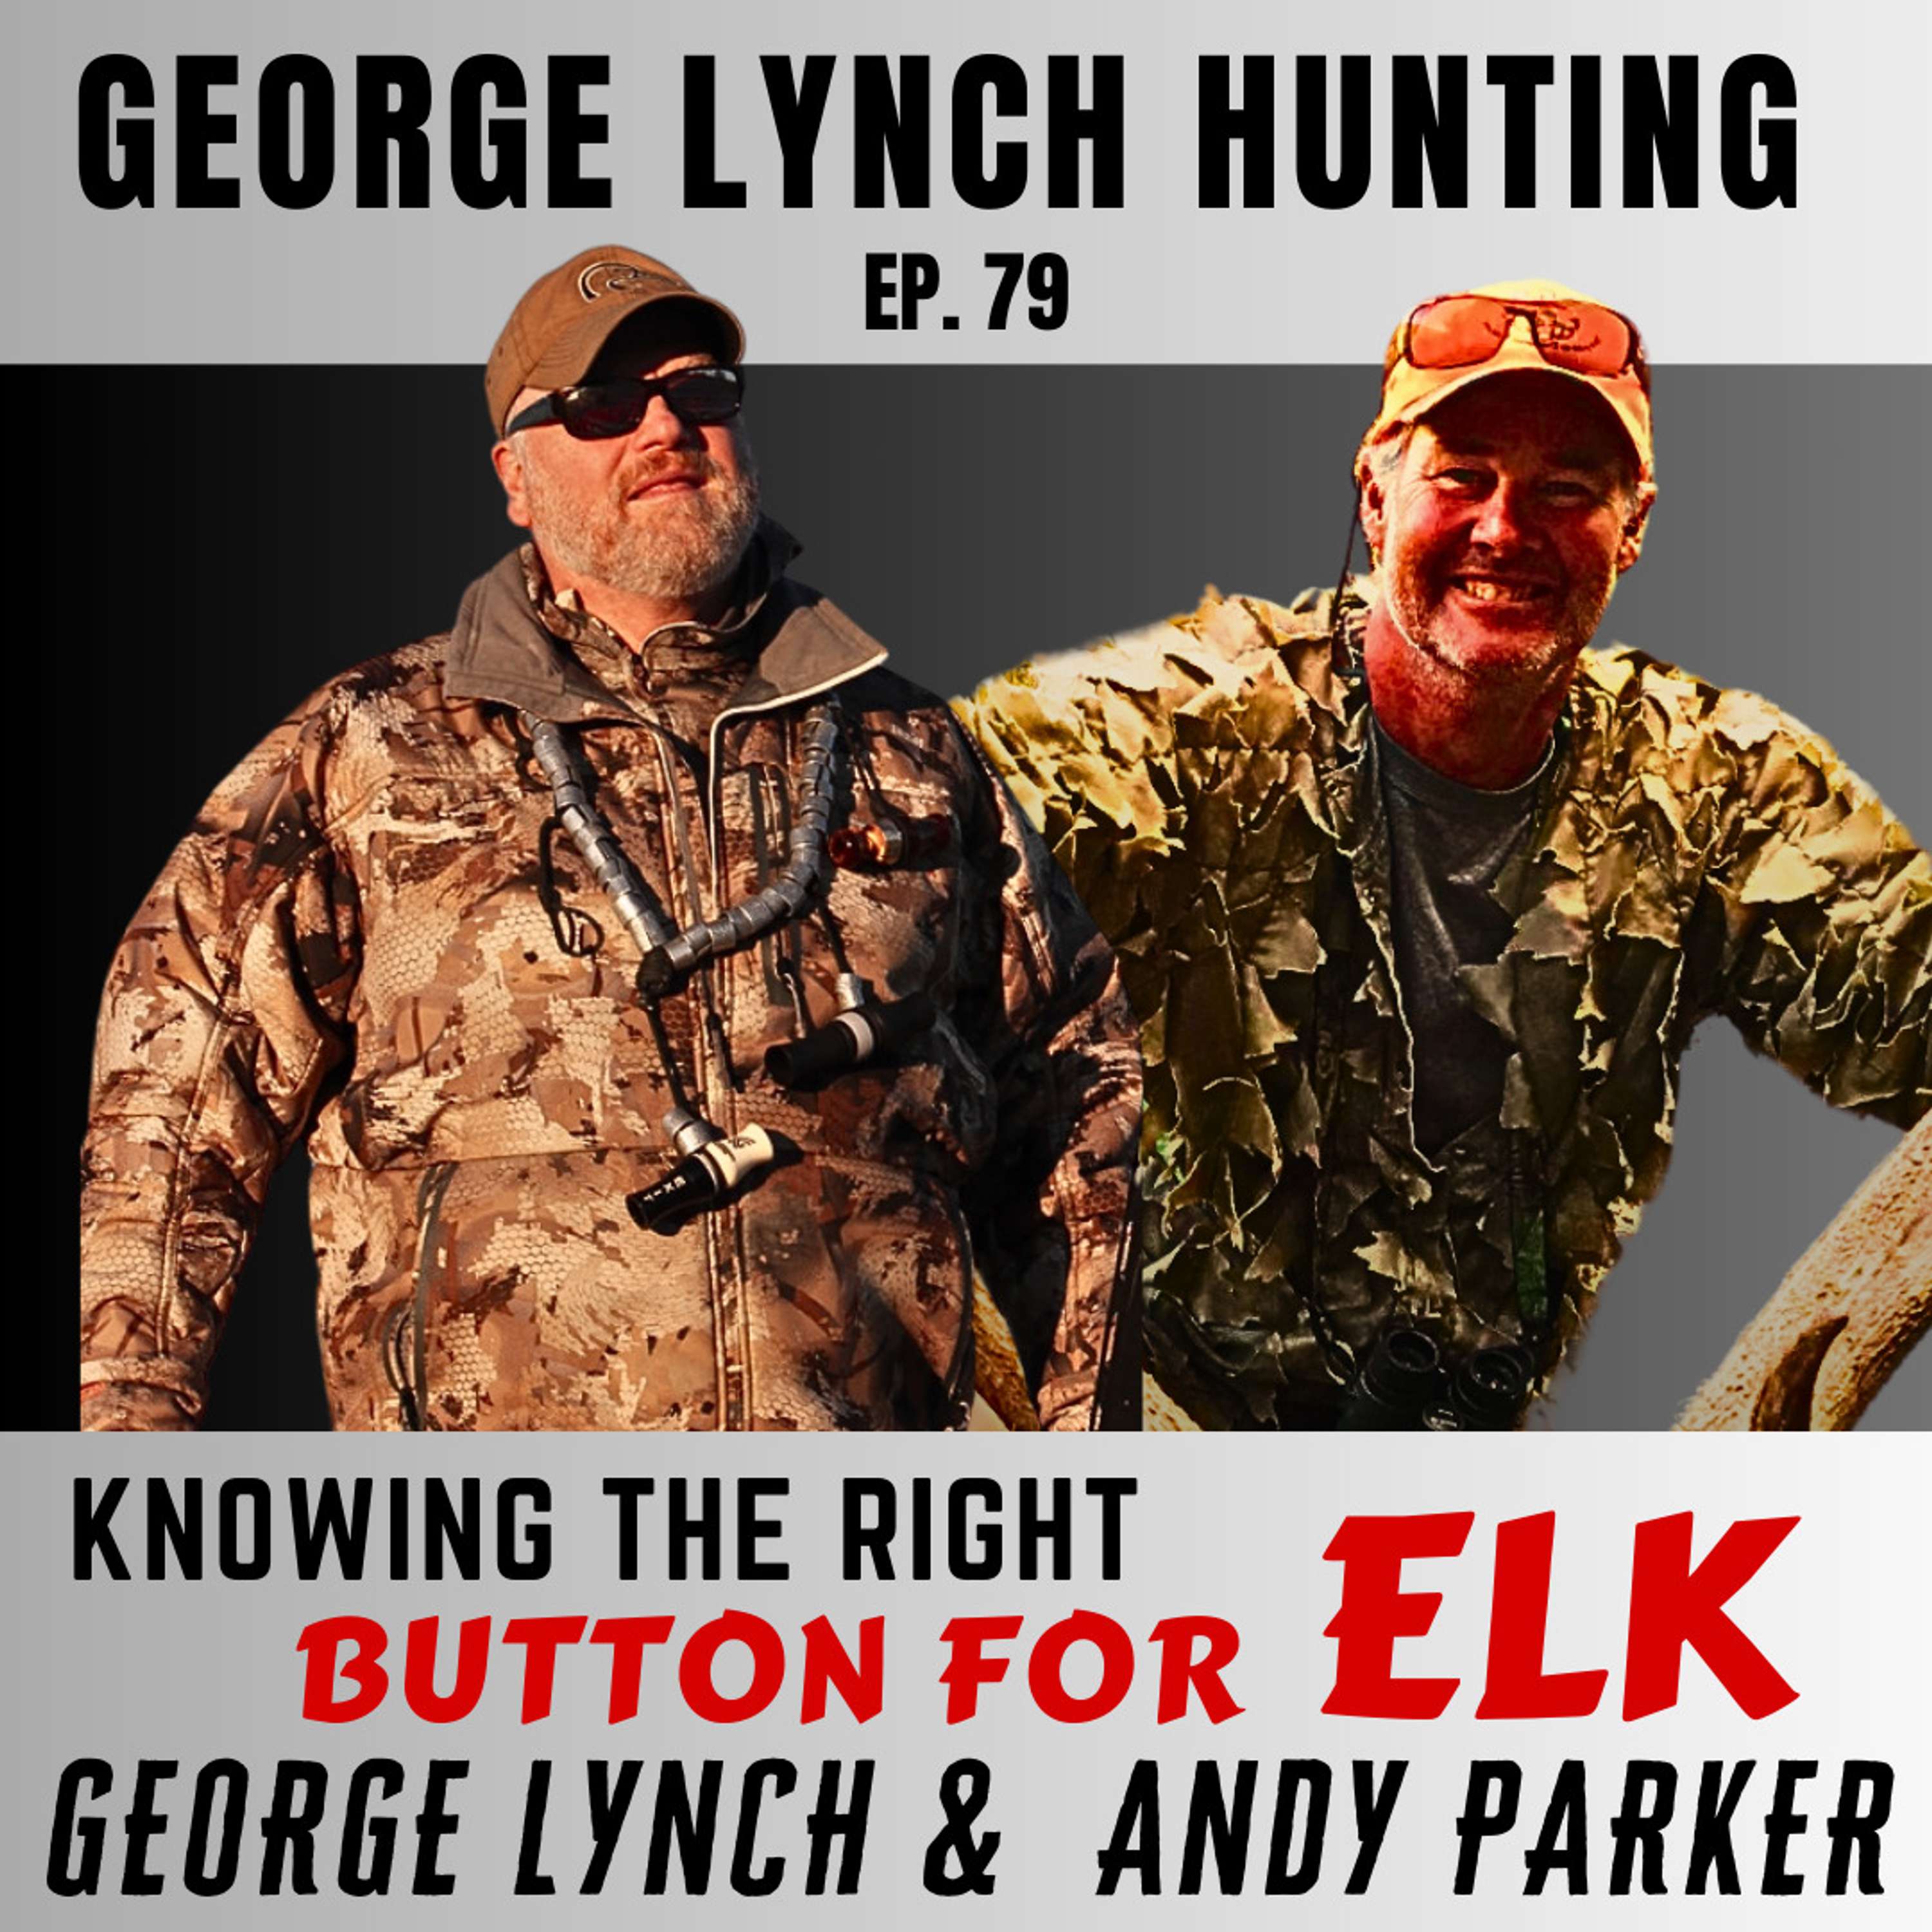 KNOWING THE RIGHT BUTTON FOR ELK - GEORGE LYNCH WITH ANDY PARKER